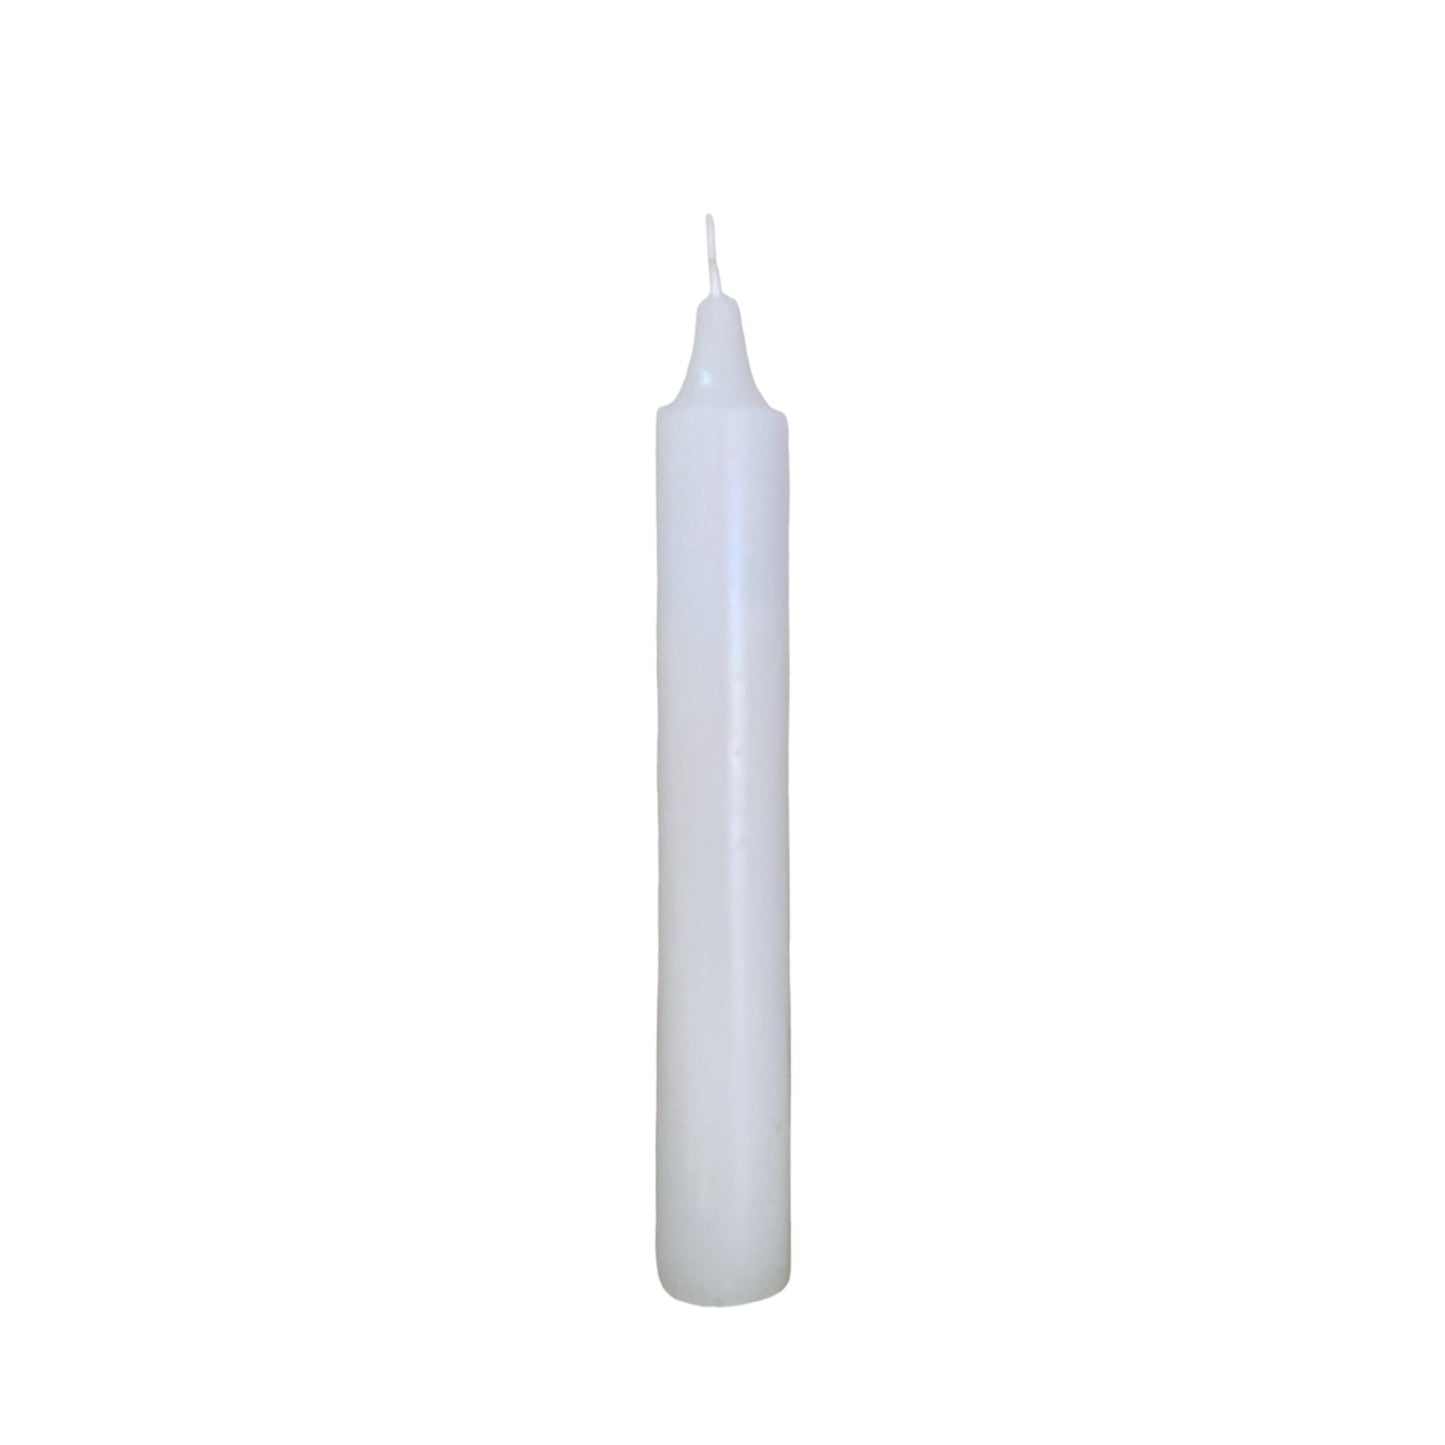 White Candle - Solid - 14cm